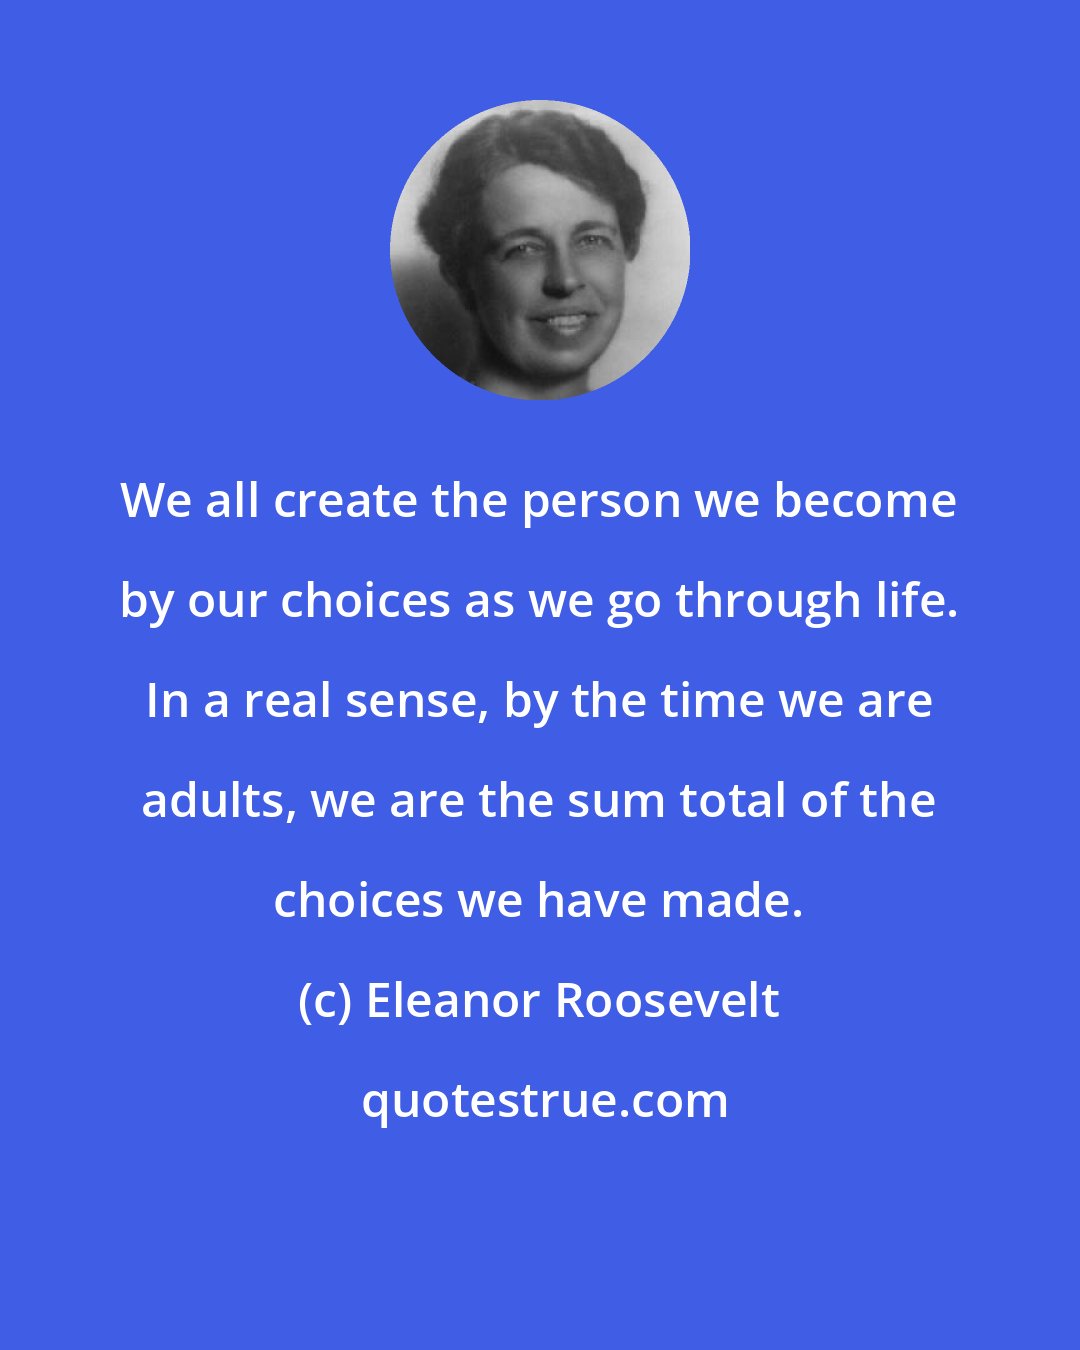 Eleanor Roosevelt: We all create the person we become by our choices as we go through life. In a real sense, by the time we are adults, we are the sum total of the choices we have made.